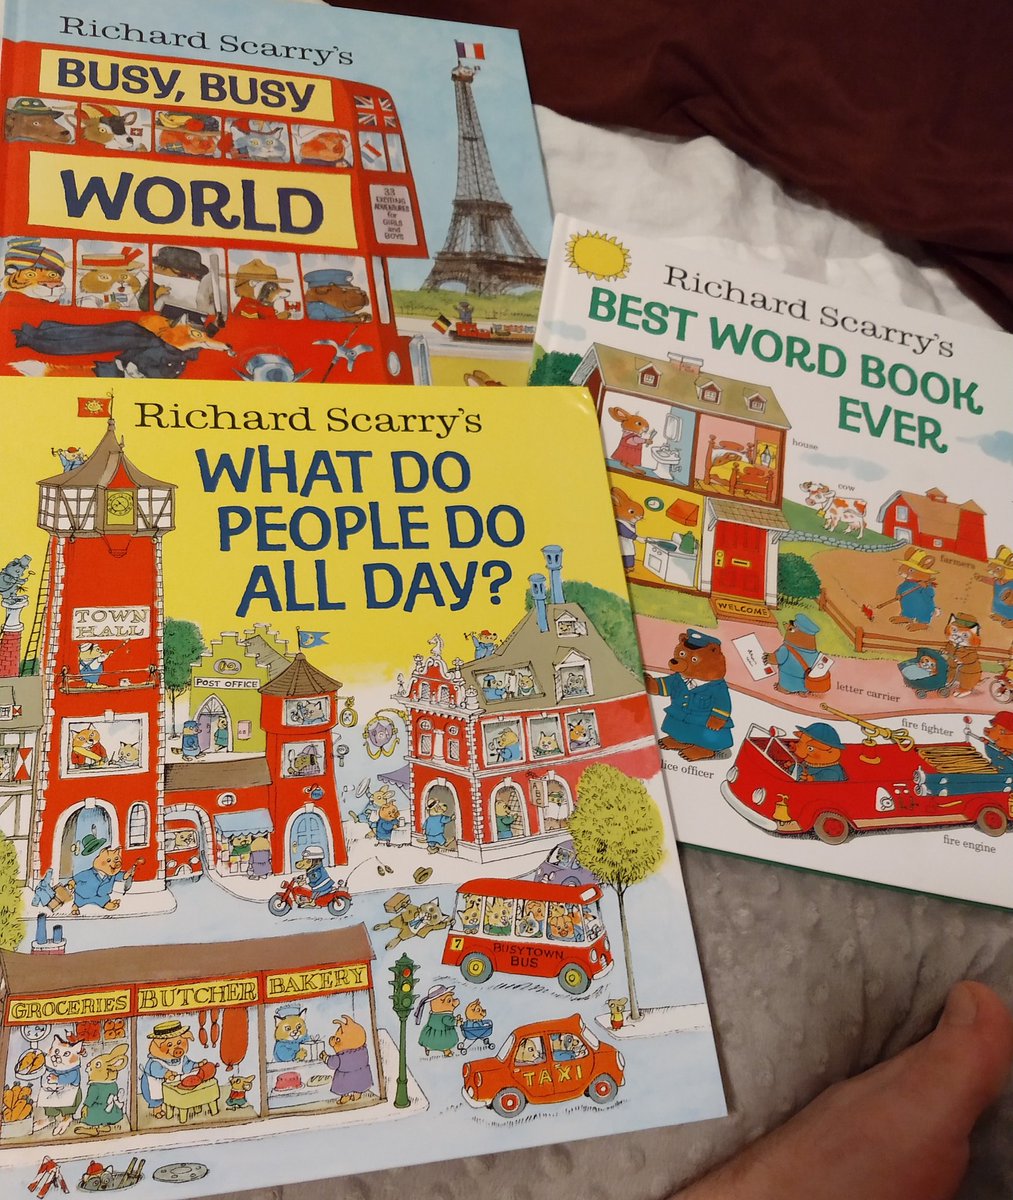 60. Well they say that Richard Scarryowns one half of this whole townWith political connectionsTo spread his wealth aroundBorn into societya banker's only childHe had everything a man could wantPower, grace, and styleBut I work in his factoryAnd I curse the life I'm